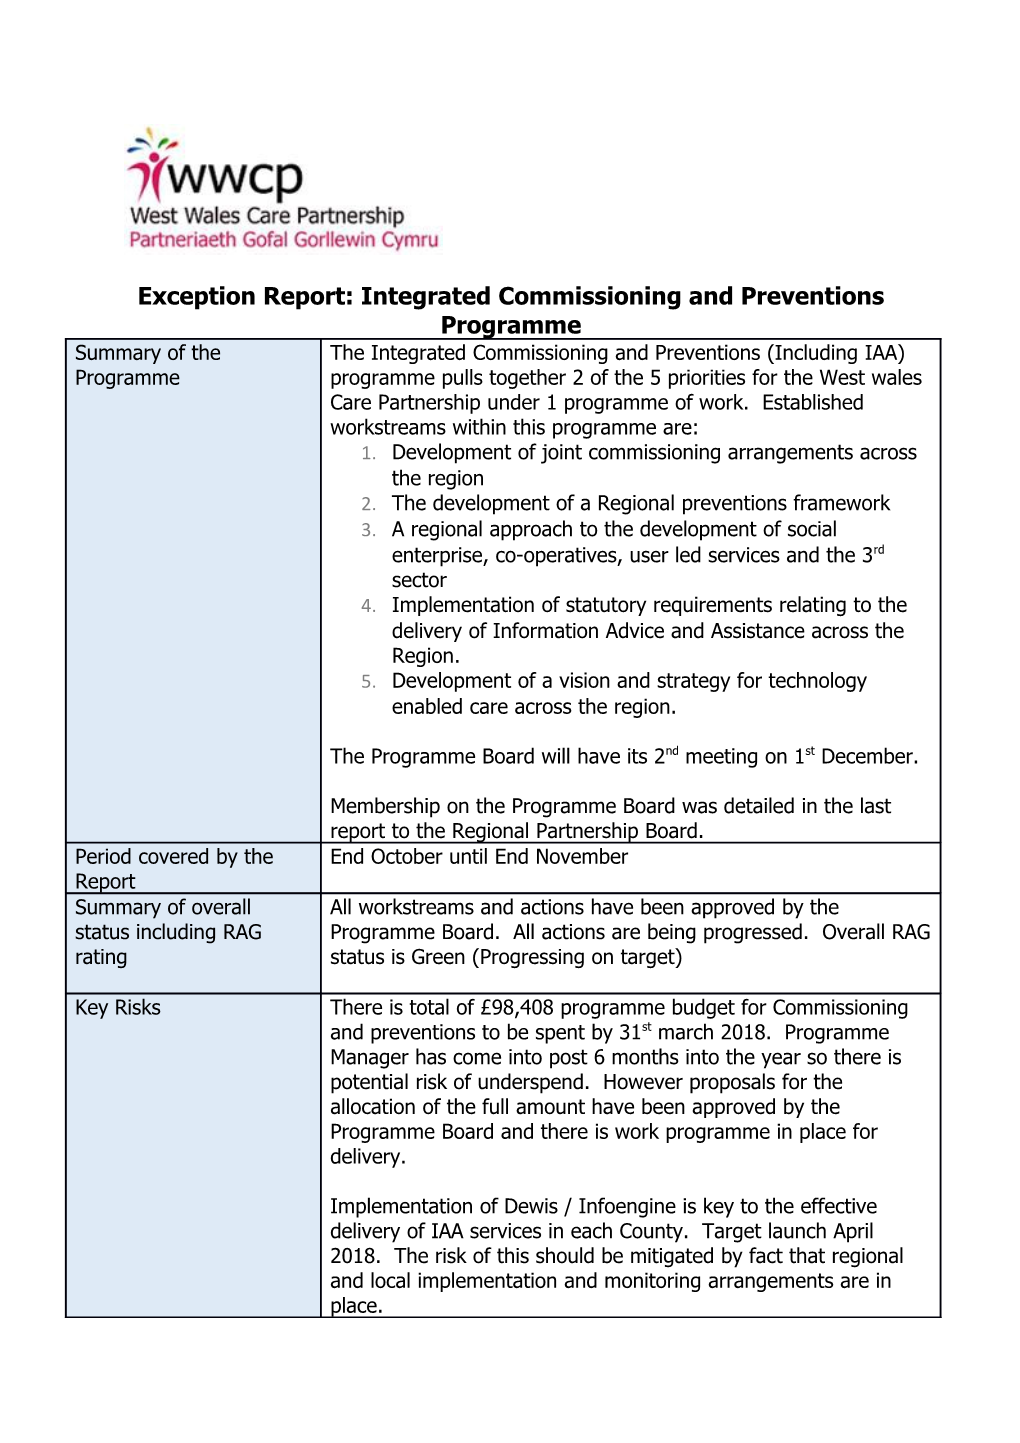 Exception Report: Integrated Commissioning and Preventions Programme